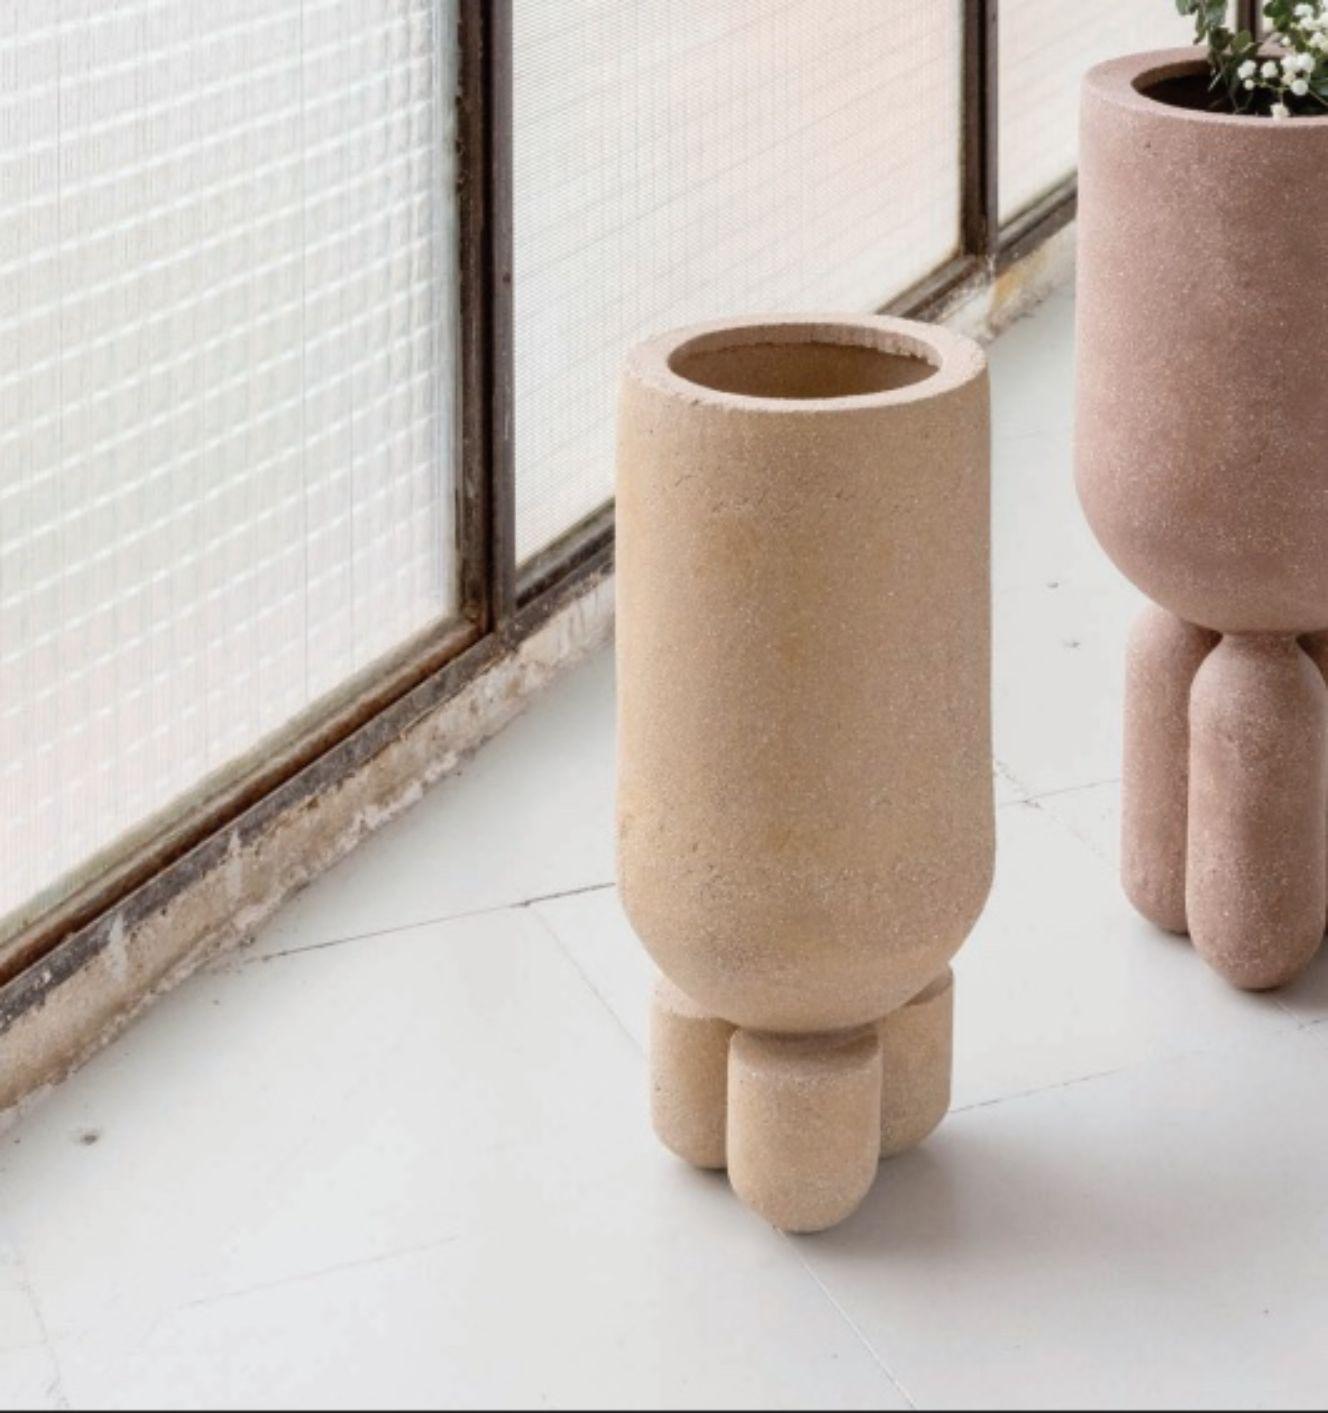 Planter clay vase by Lisa Allegra
Dimensions: ø 16 x 37 cm
Materials: Clay

Born in 1986 in Paris, Lisa Allegra has earned in 2010 a degree in furniture design from the École Supérieure des Arts Décoratifs. She has worked for Tsé&Tsé Associées